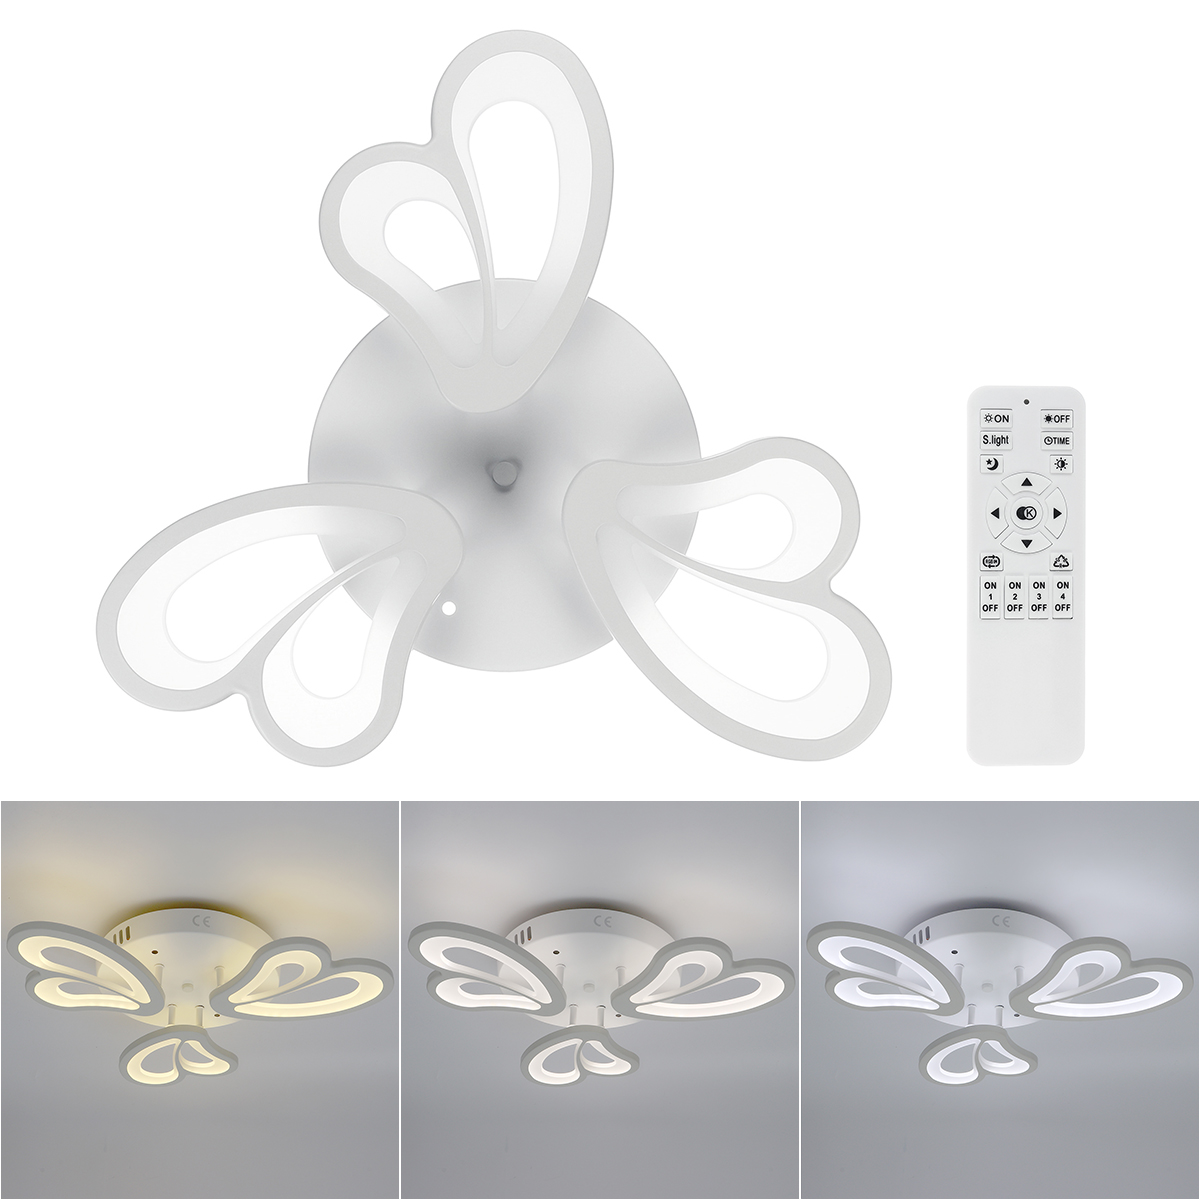 Find 3 Heads Modern Ceiling Lamp Remote Control Living Room Bedroom Study Light AC110 220V for Sale on Gipsybee.com with cryptocurrencies